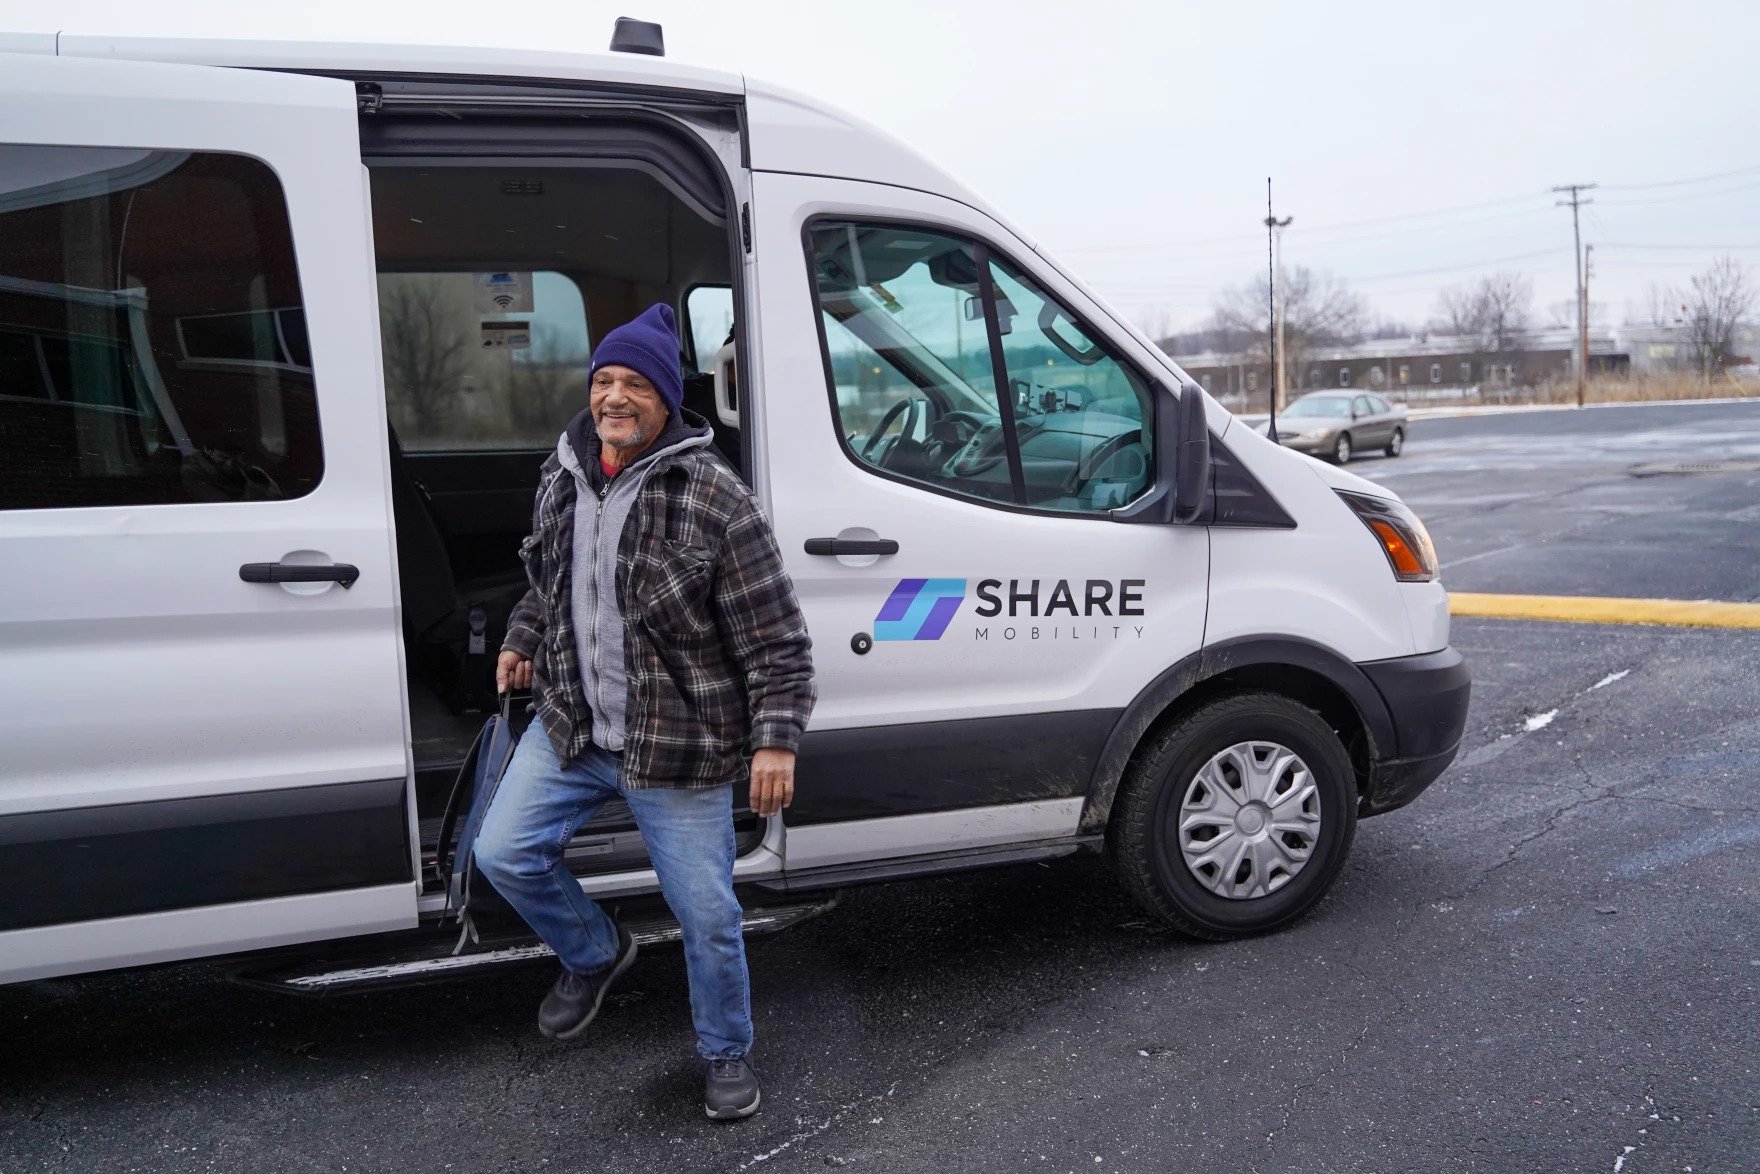 A SHARE mobility van